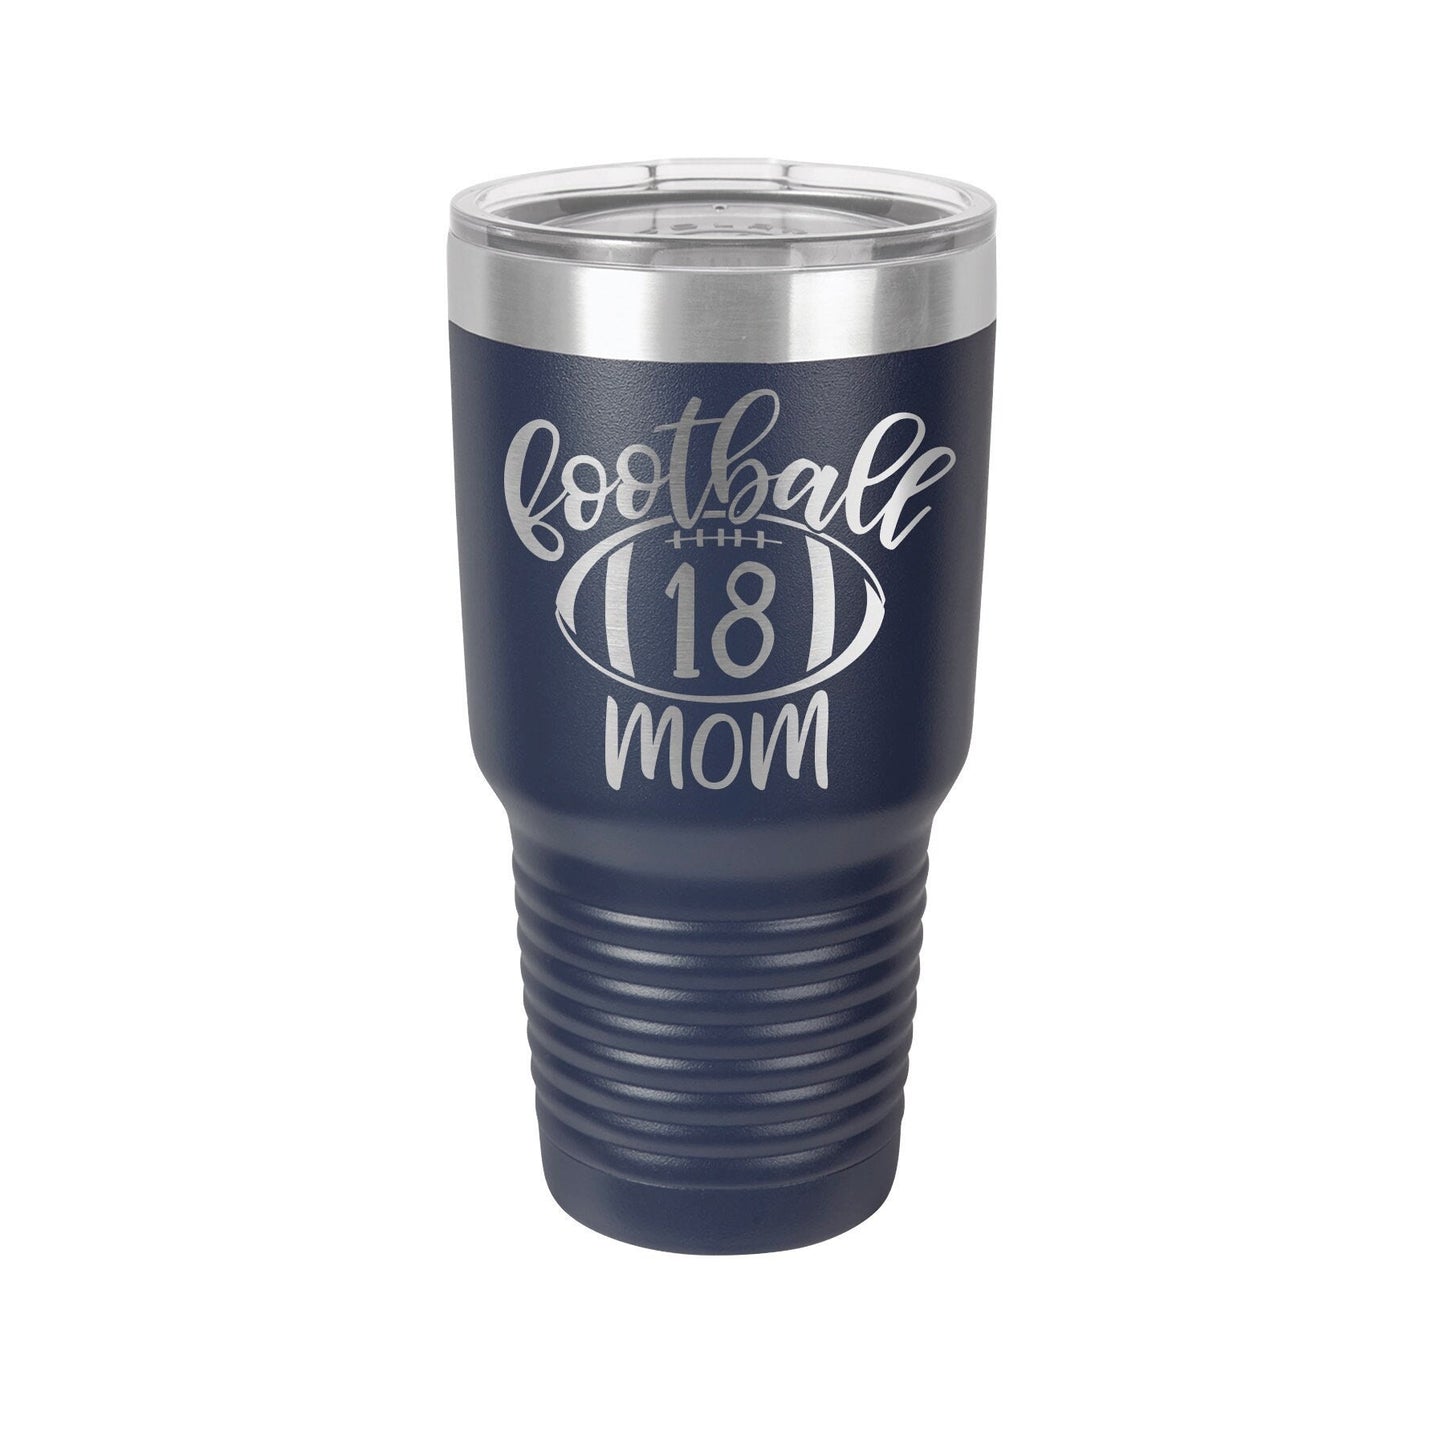 Football Mom Personalized Tumbler Player Number Insulated Tumbler, Engraved Cup Custom Tumbler Cup Christmas Birthday Gift Football Mom 1001